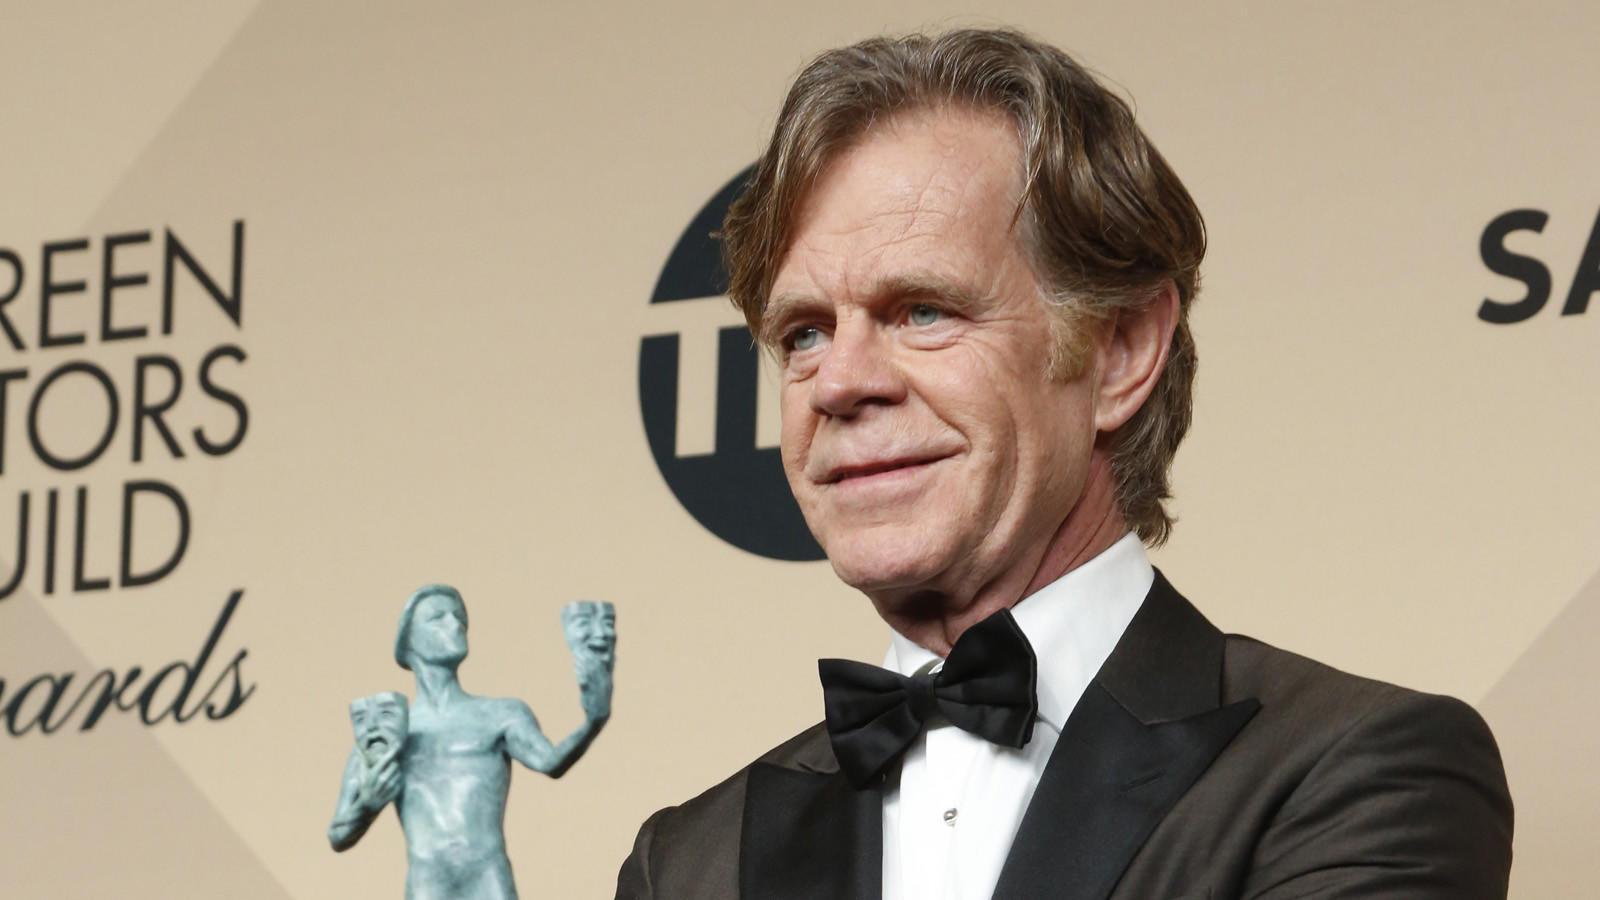 When will 'Shameless' end? Star William H. Macy weighs in